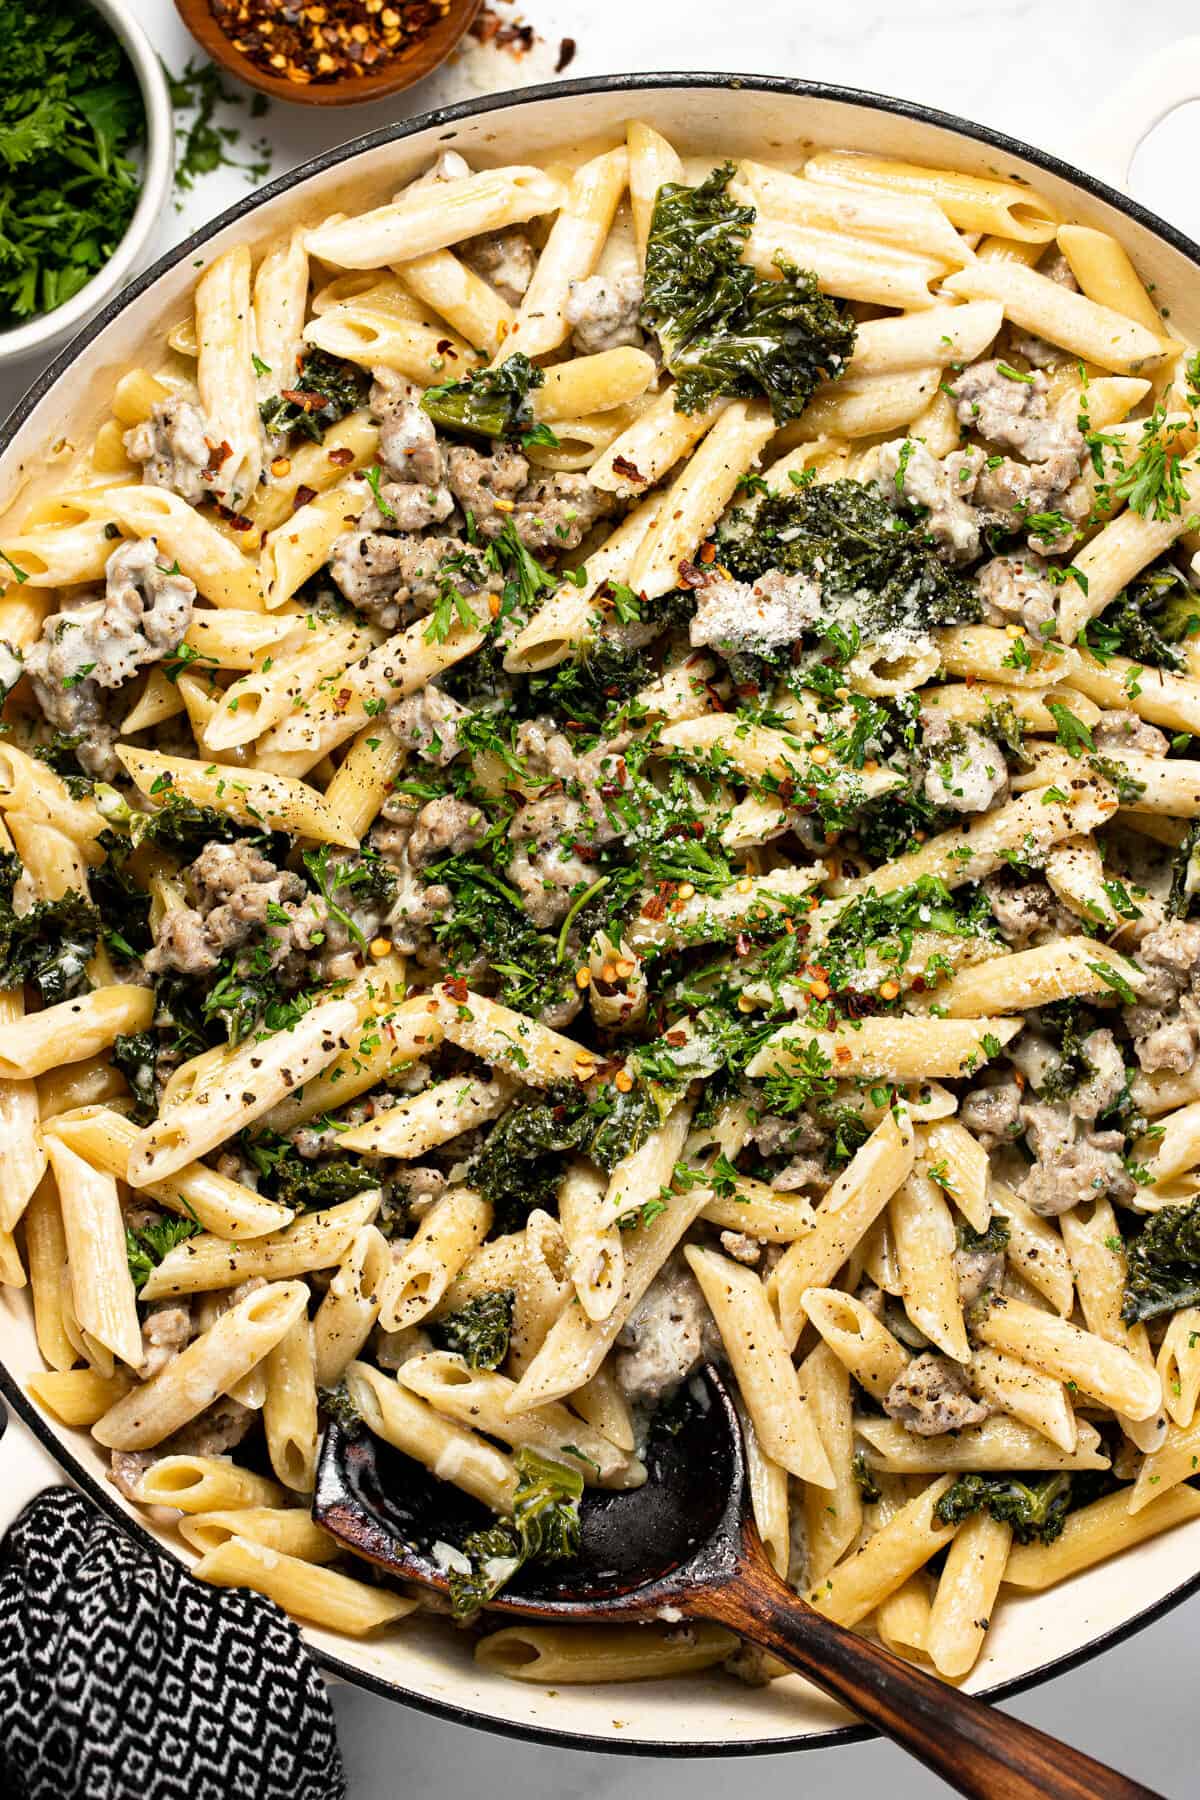 Large white pan filled with Italian sausage and kale pasta garnished with parsley